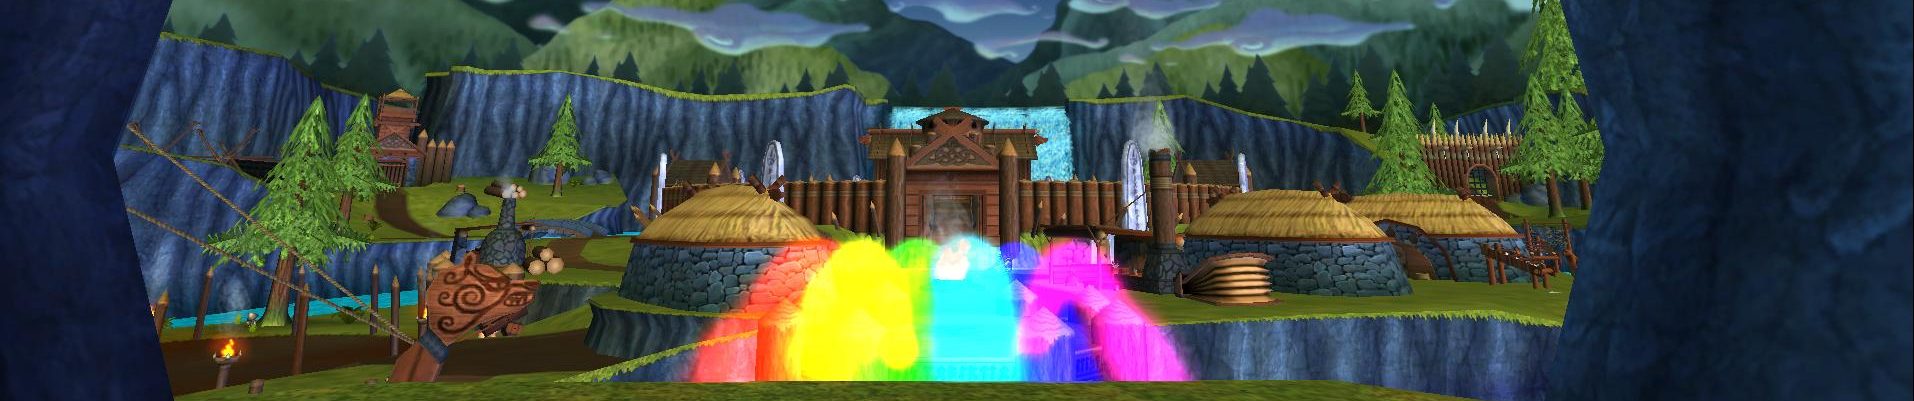 The History Behind Wizard101 Central